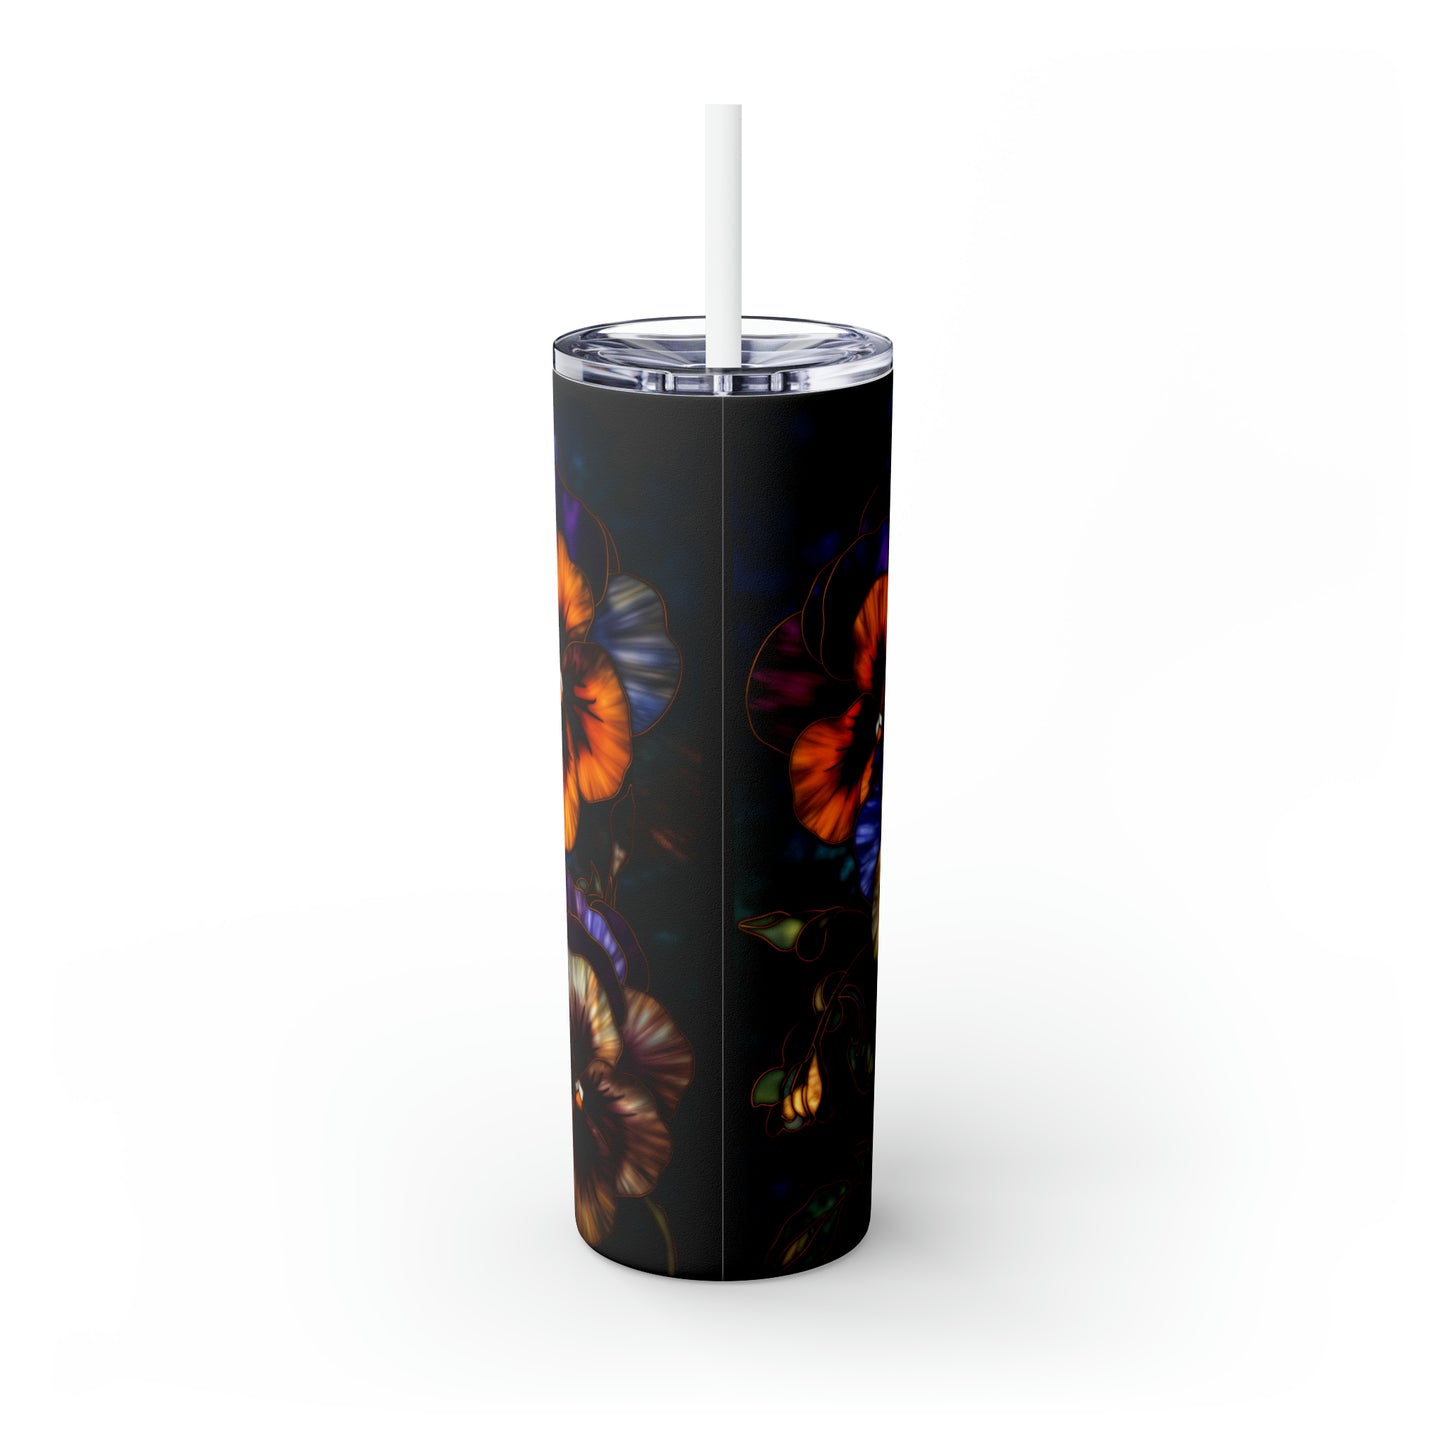 Stained Glass Pansies Tumbler, 20 oz Skinny Tumbler